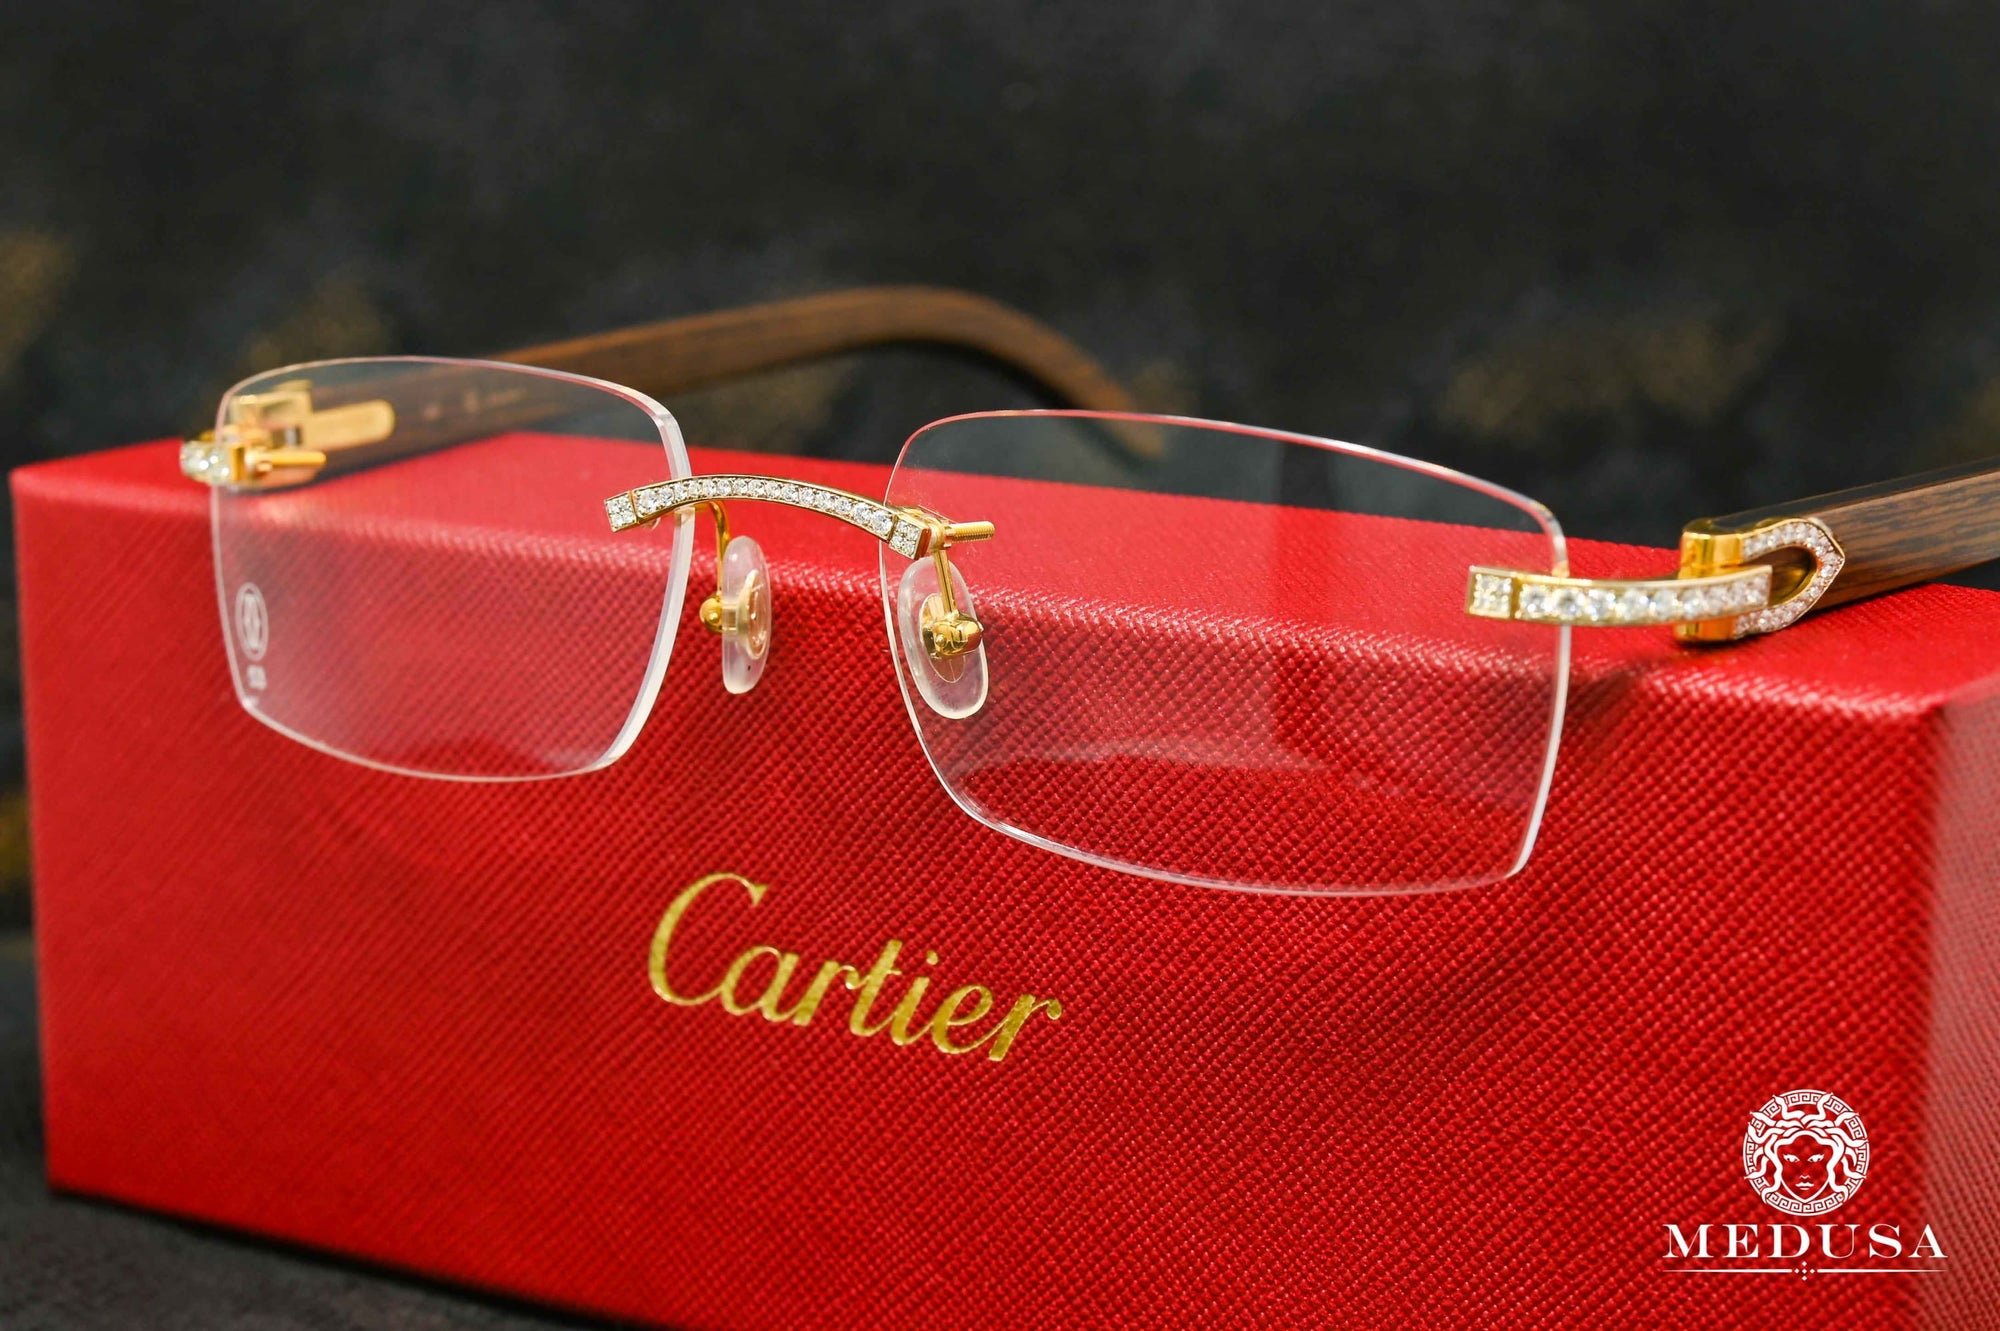 Cartier Eyewear | Luxury Sunglasses and Eyeglasses for Men and Women